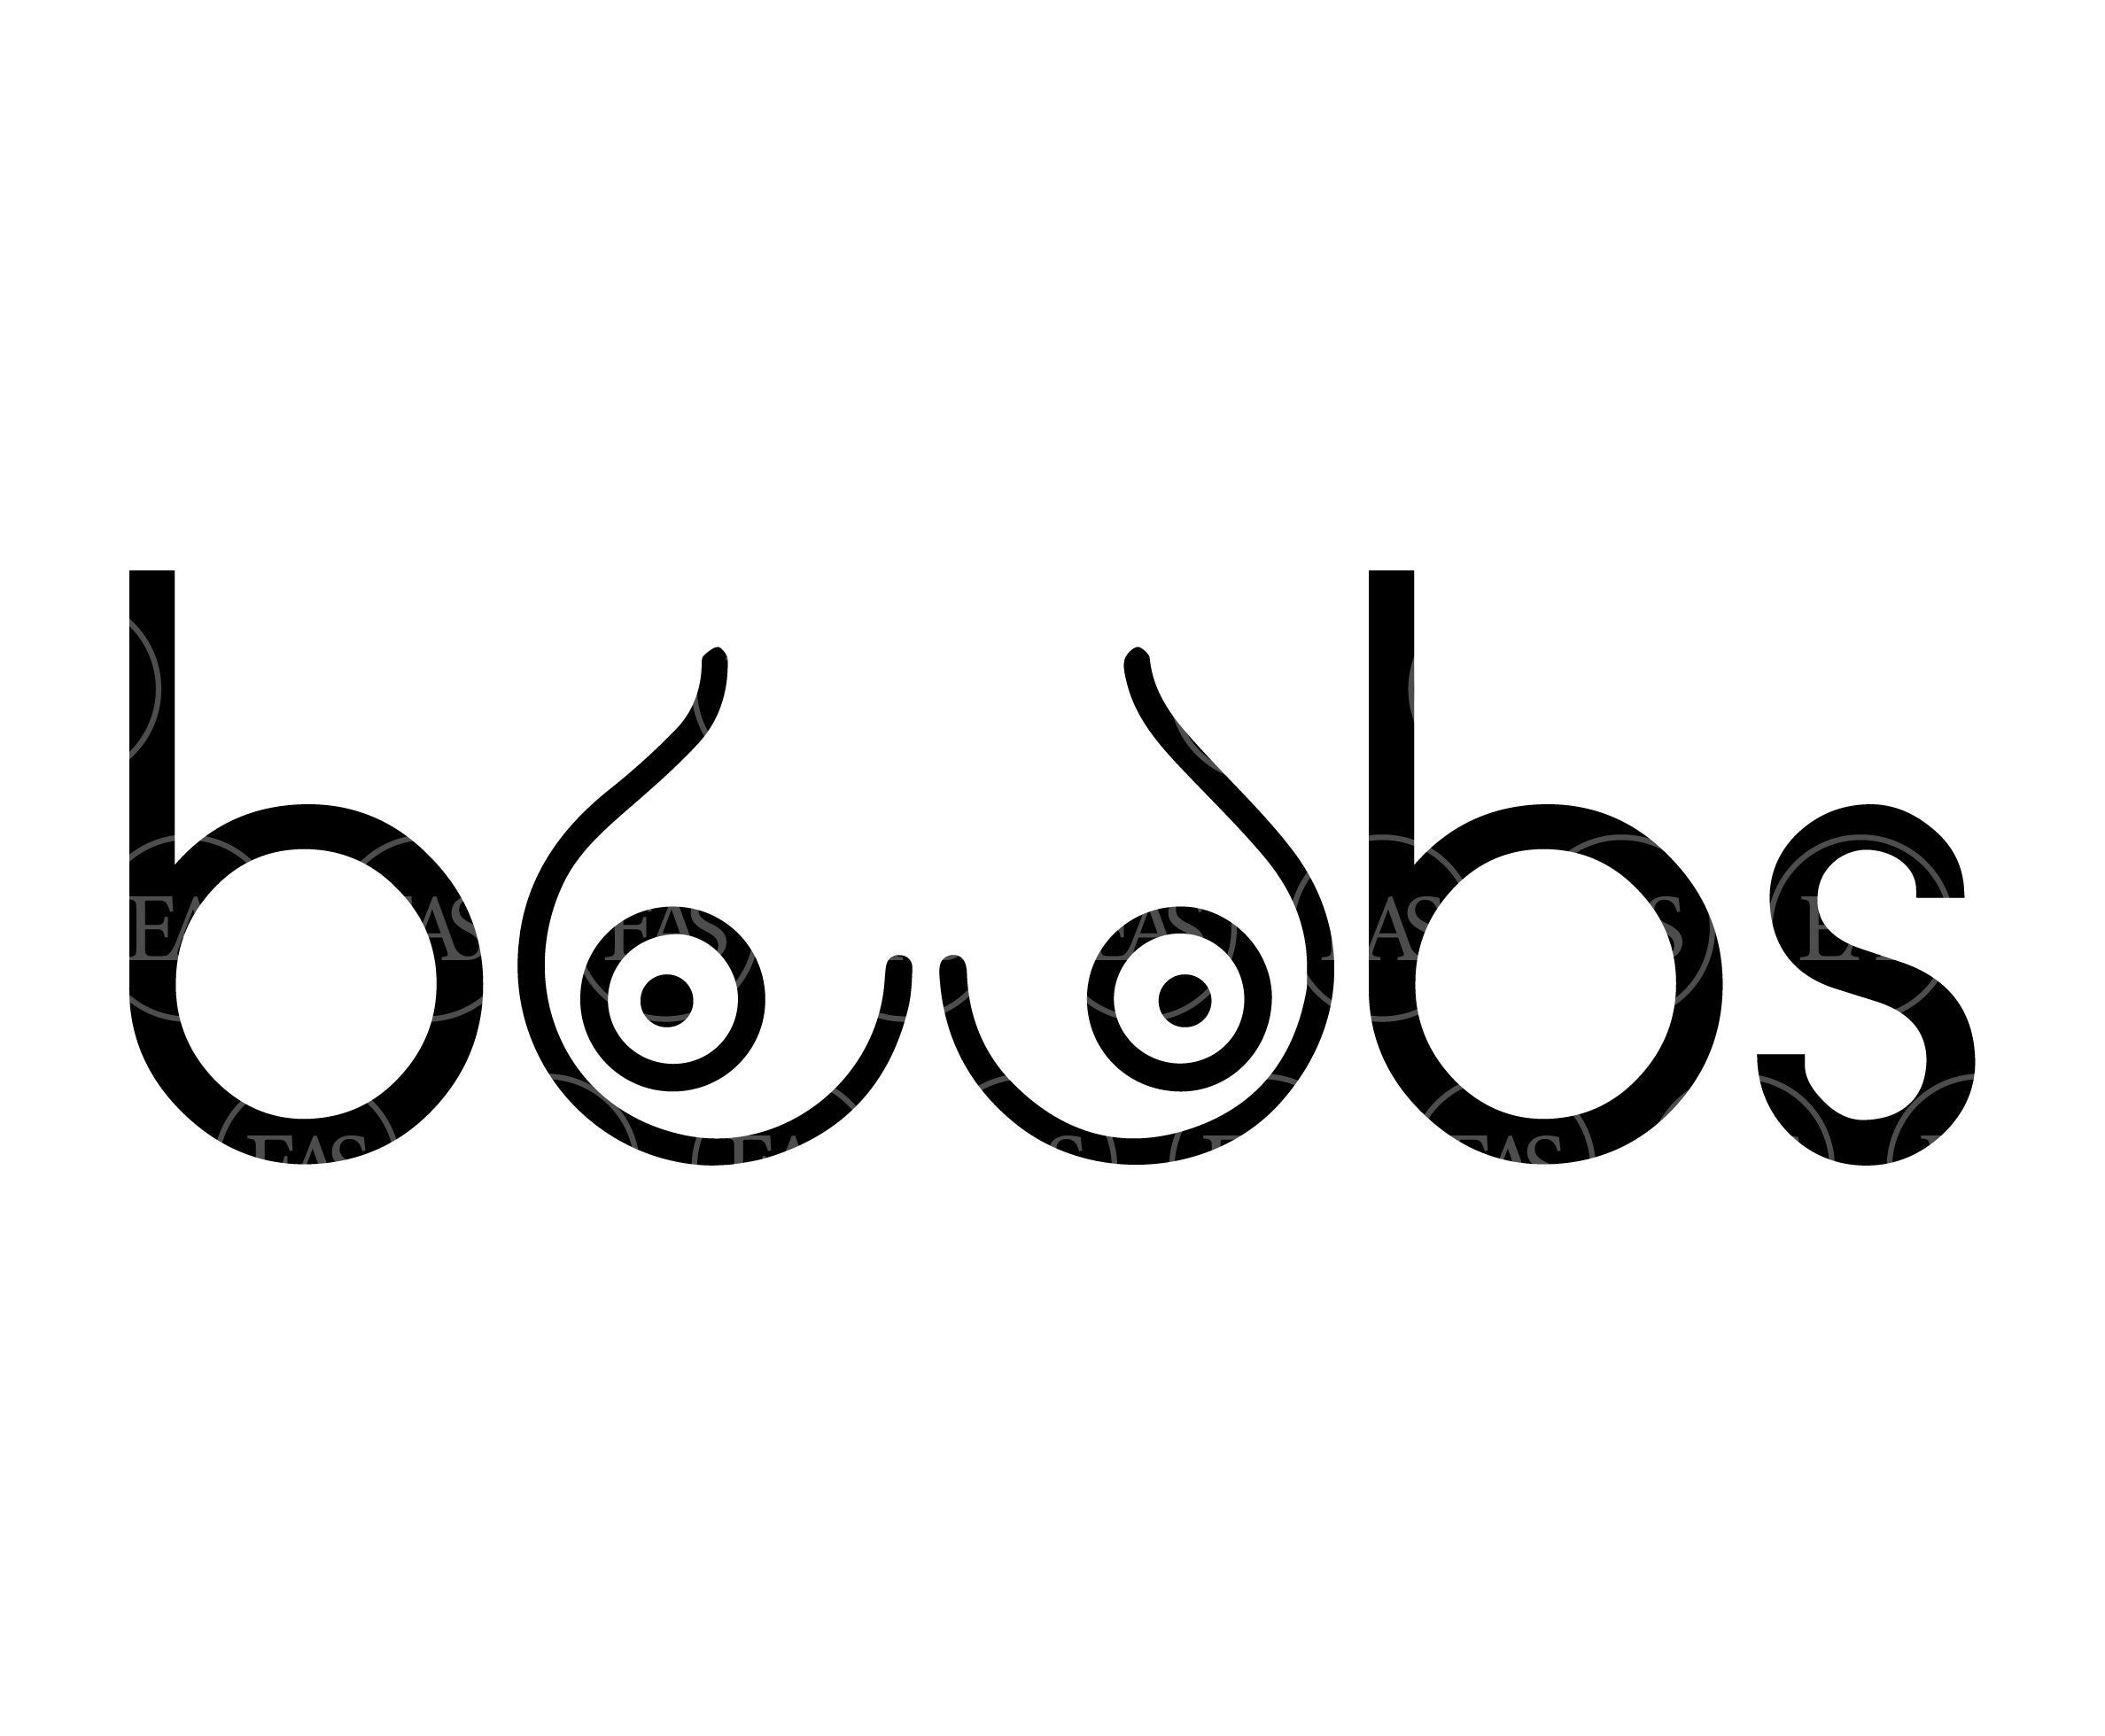 Boobs Svg, Hand Drawn Tits Svg. Sketch Boobies Svg. Vector Cut file for  Cricut, Silhouette, Sticker, Decal, Vinyl, Stencil, Pdf Png Dxf Eps.